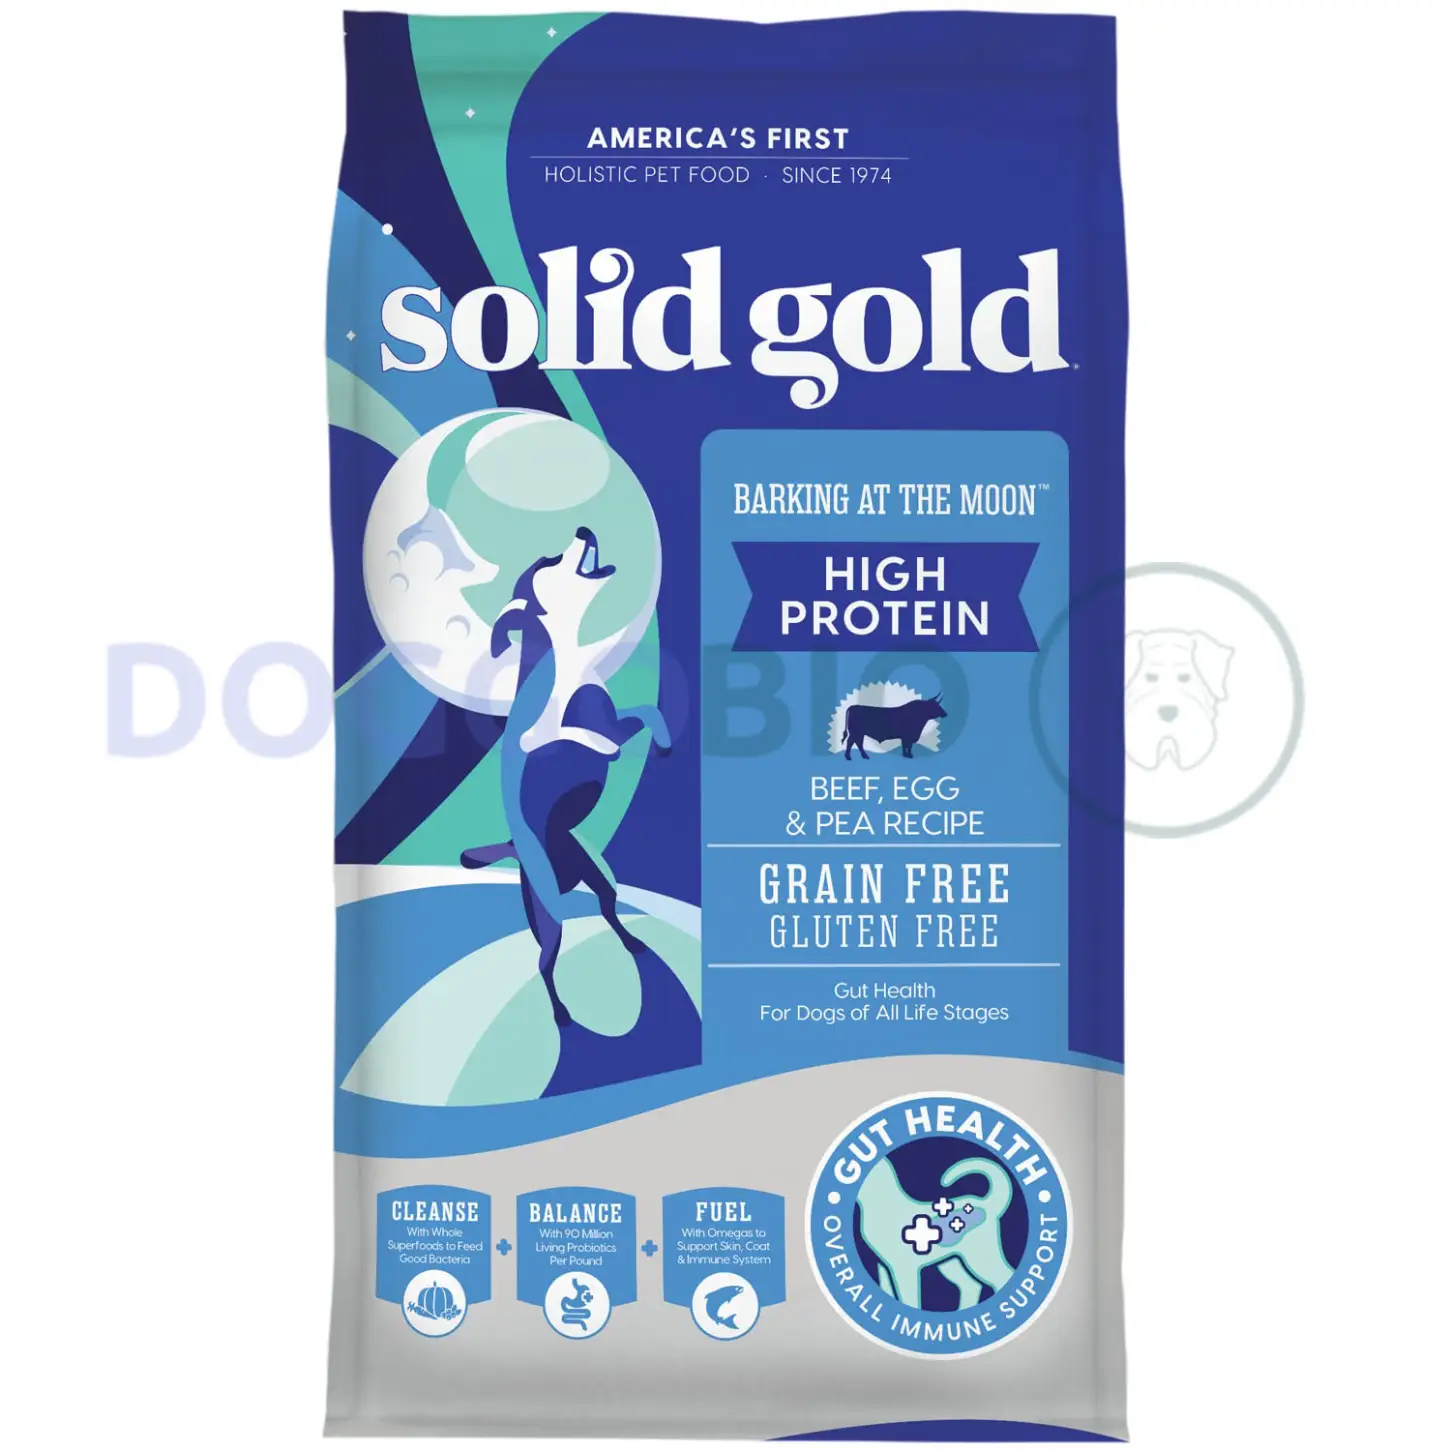 Solid Gold Barking at the Moon High-Protein Grain-Free